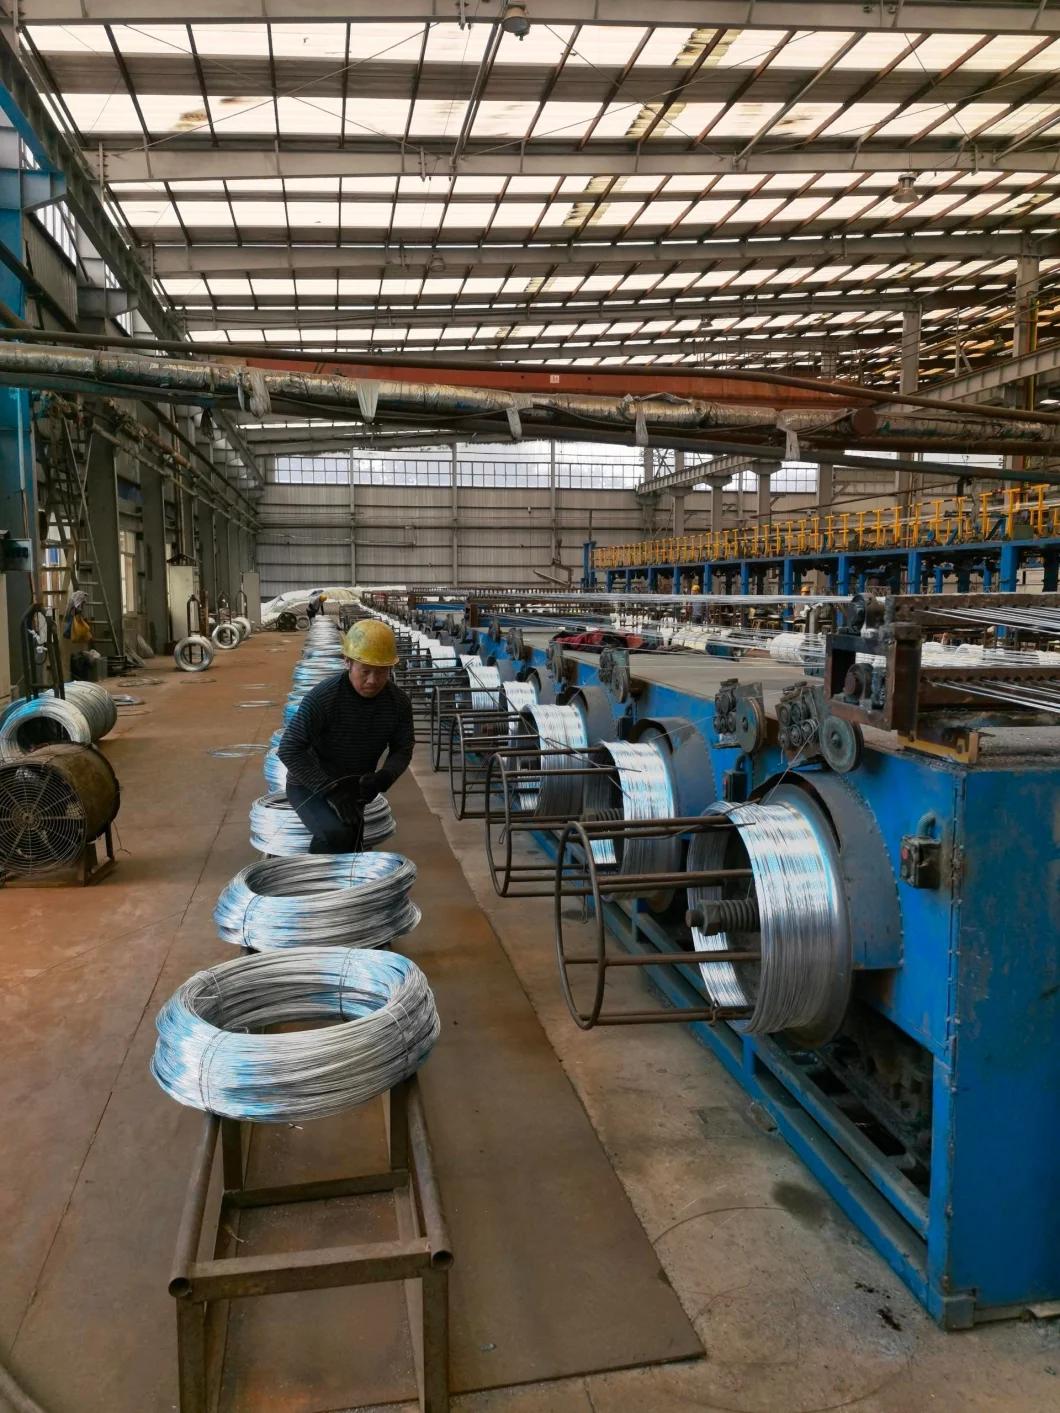 Manufacturer SAE 1006 Cr Hot Rolled Steel Wire in Coils for Making Nails